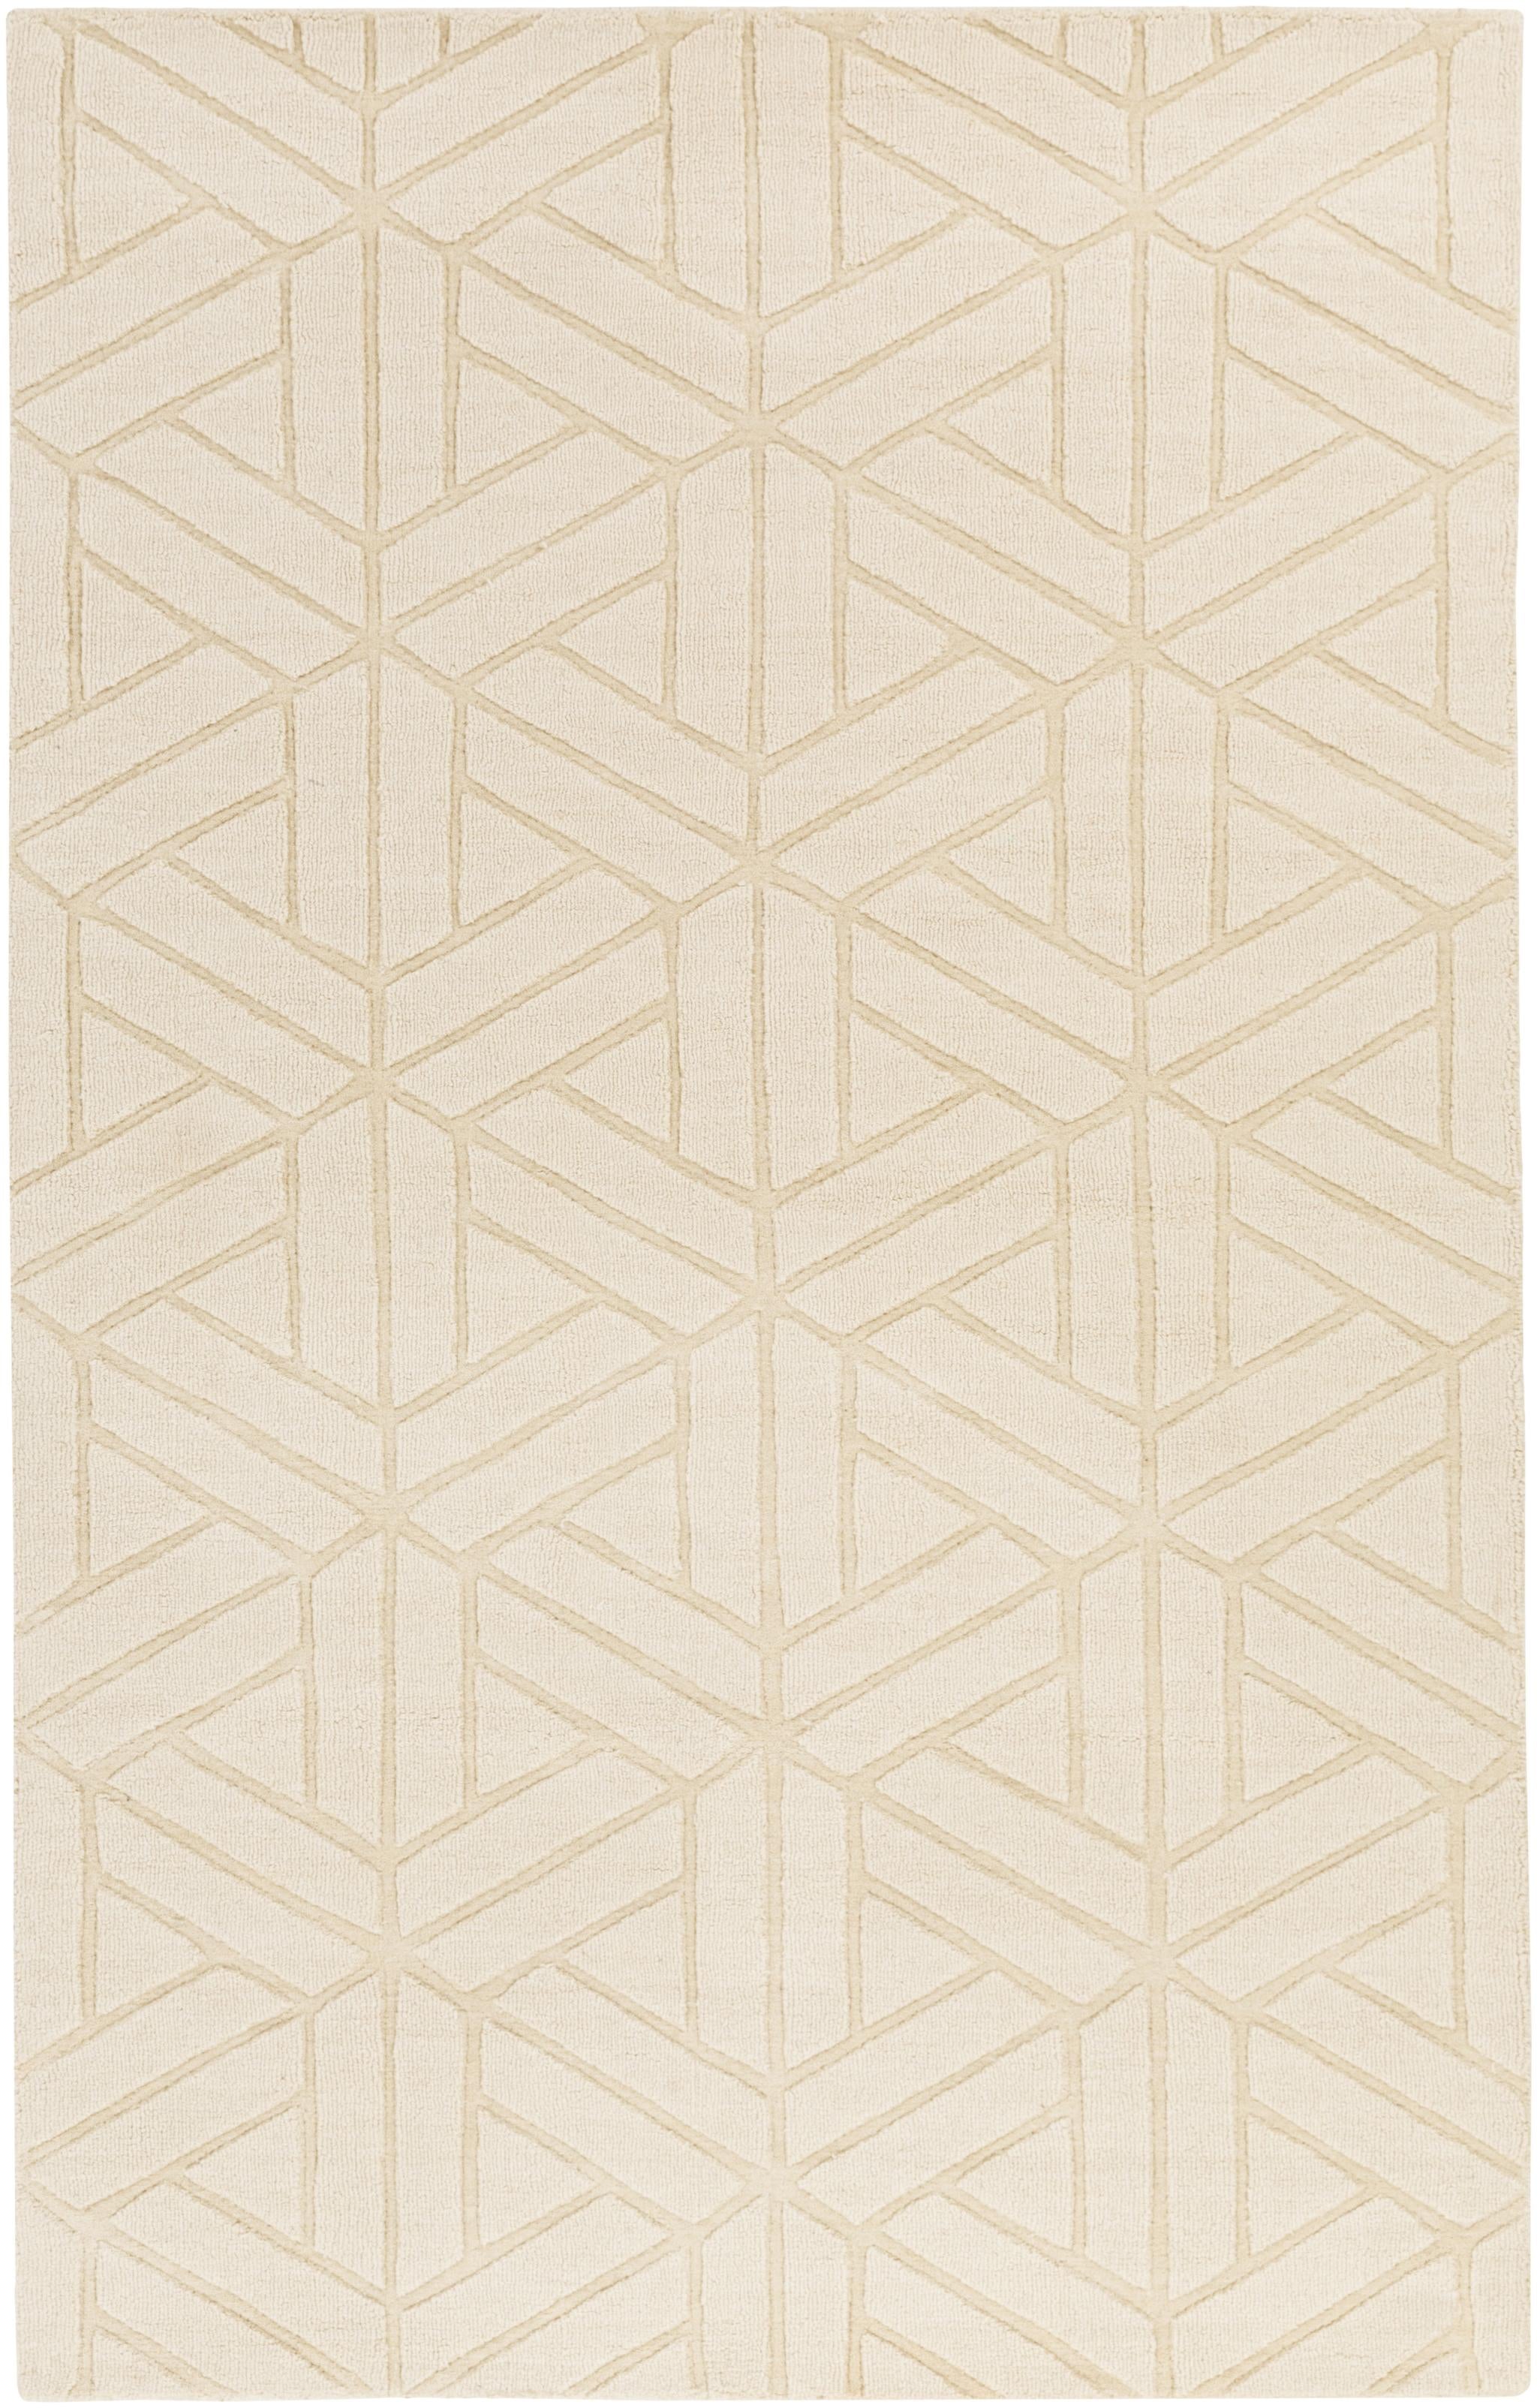 Mystique Rug - The Rug Collection